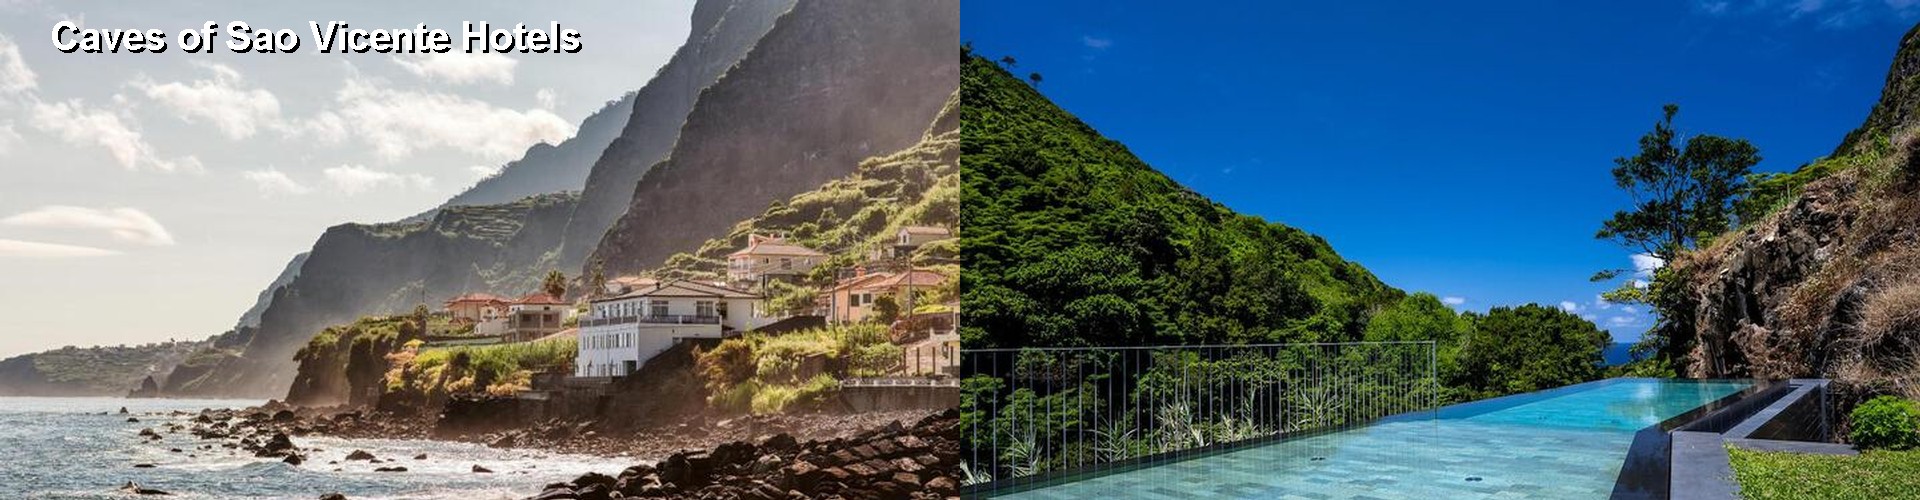 5 Best Hotels near Caves of Sao Vicente